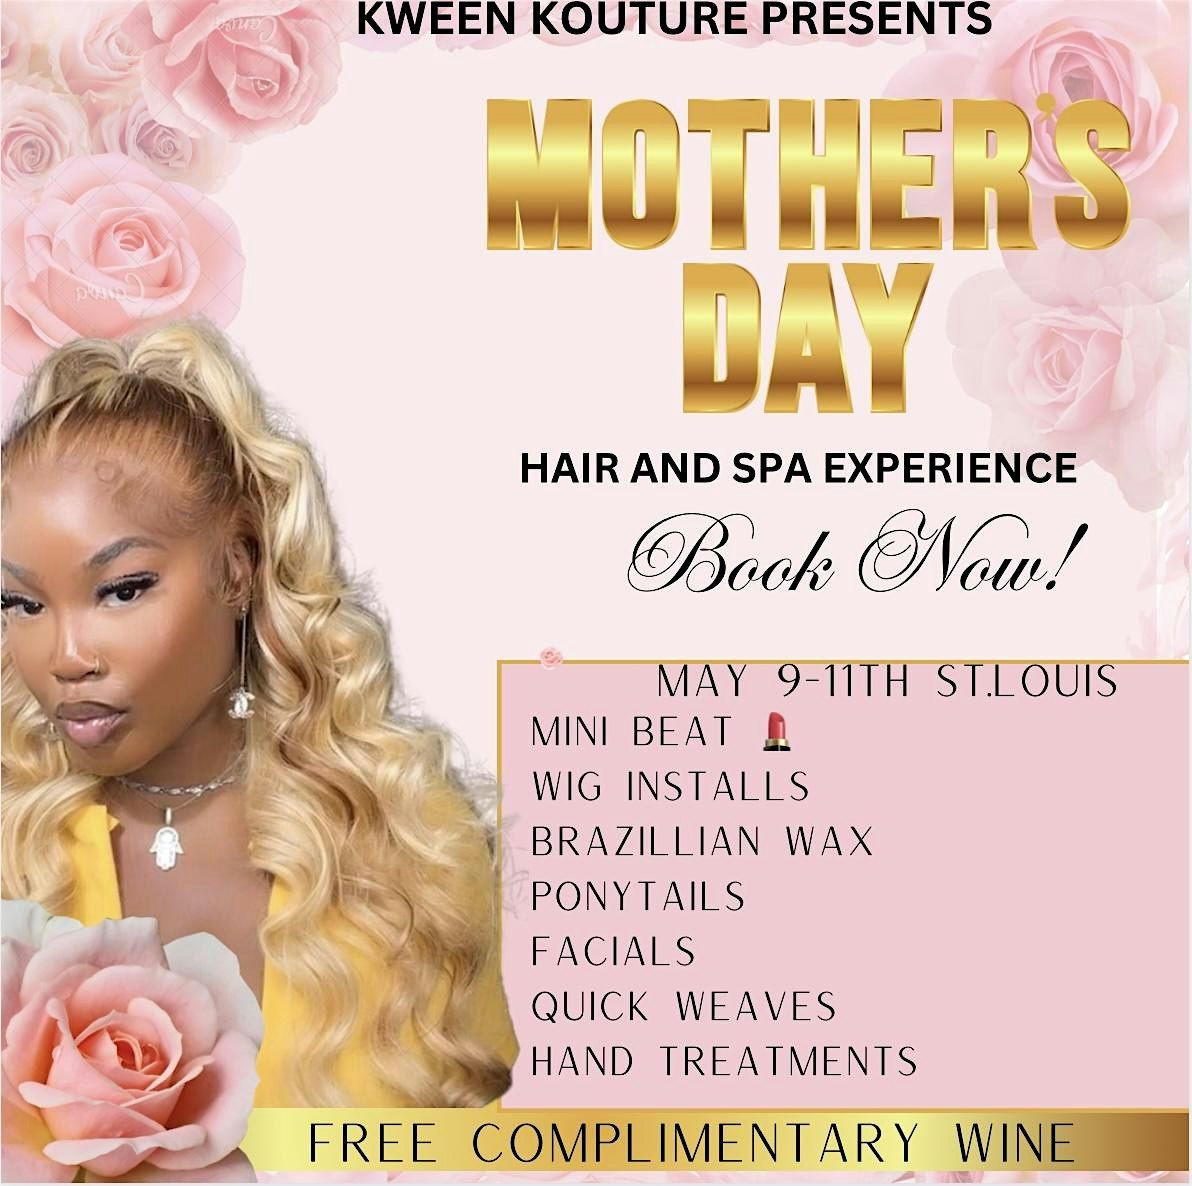 KWEEN KOUTURE MOTHERS DAY HAIR & SPA EVENT